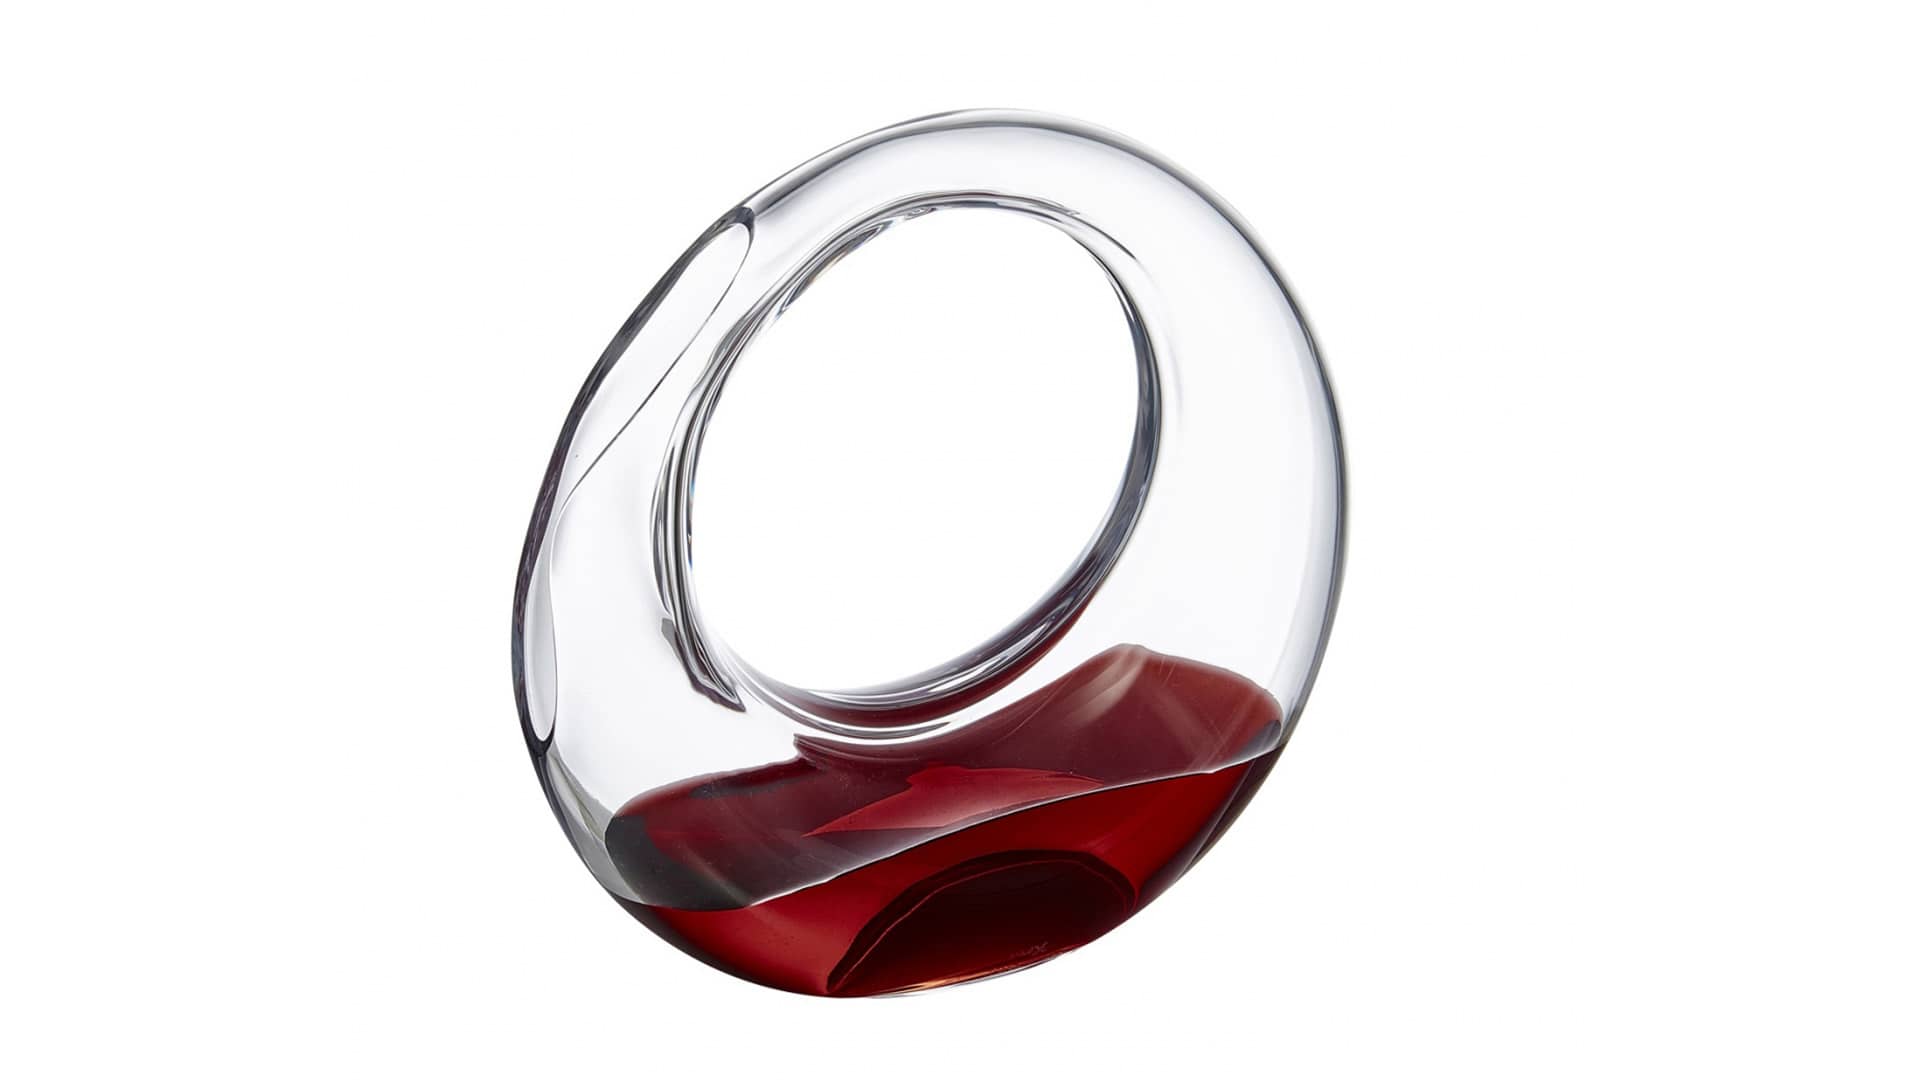 Red or White Wine Glass